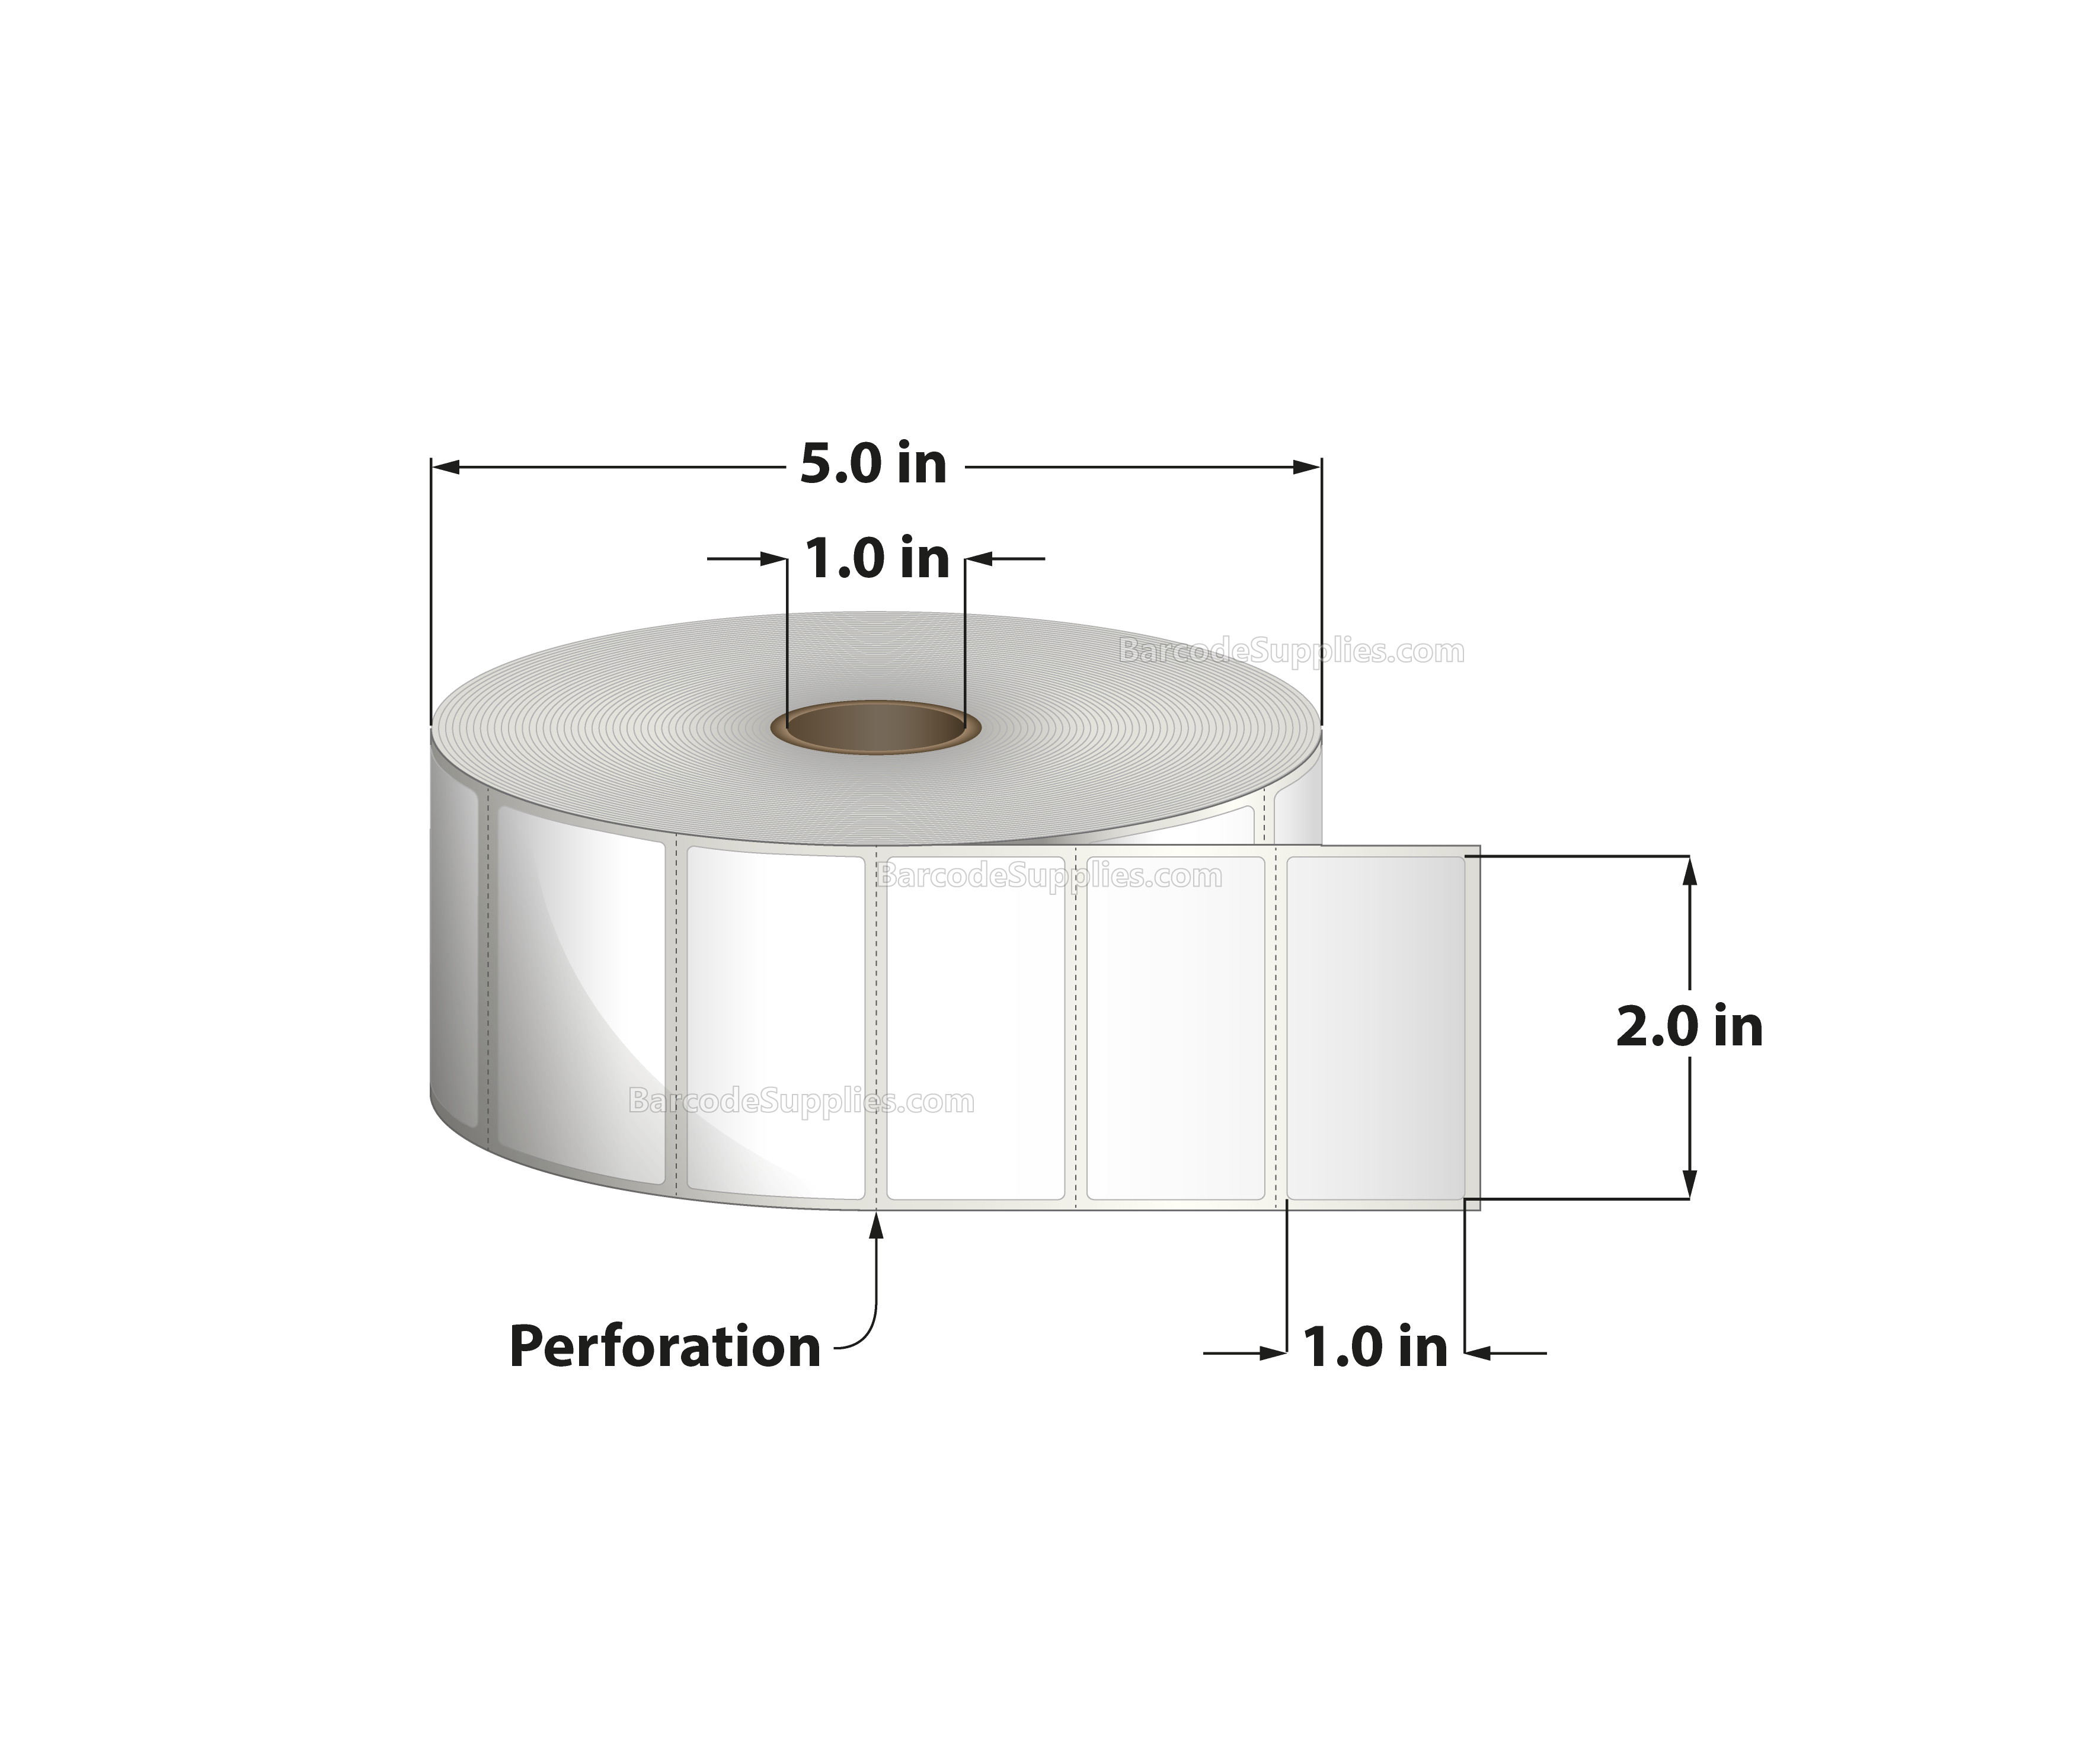 2 x 1 Direct Thermal White Labels With Acrylic Adhesive - Perforated - 2500 Labels Per Roll - Carton Of 12 Rolls - 30000 Labels Total - MPN: RD-2-1-2500-1 - BarcodeSource, Inc.